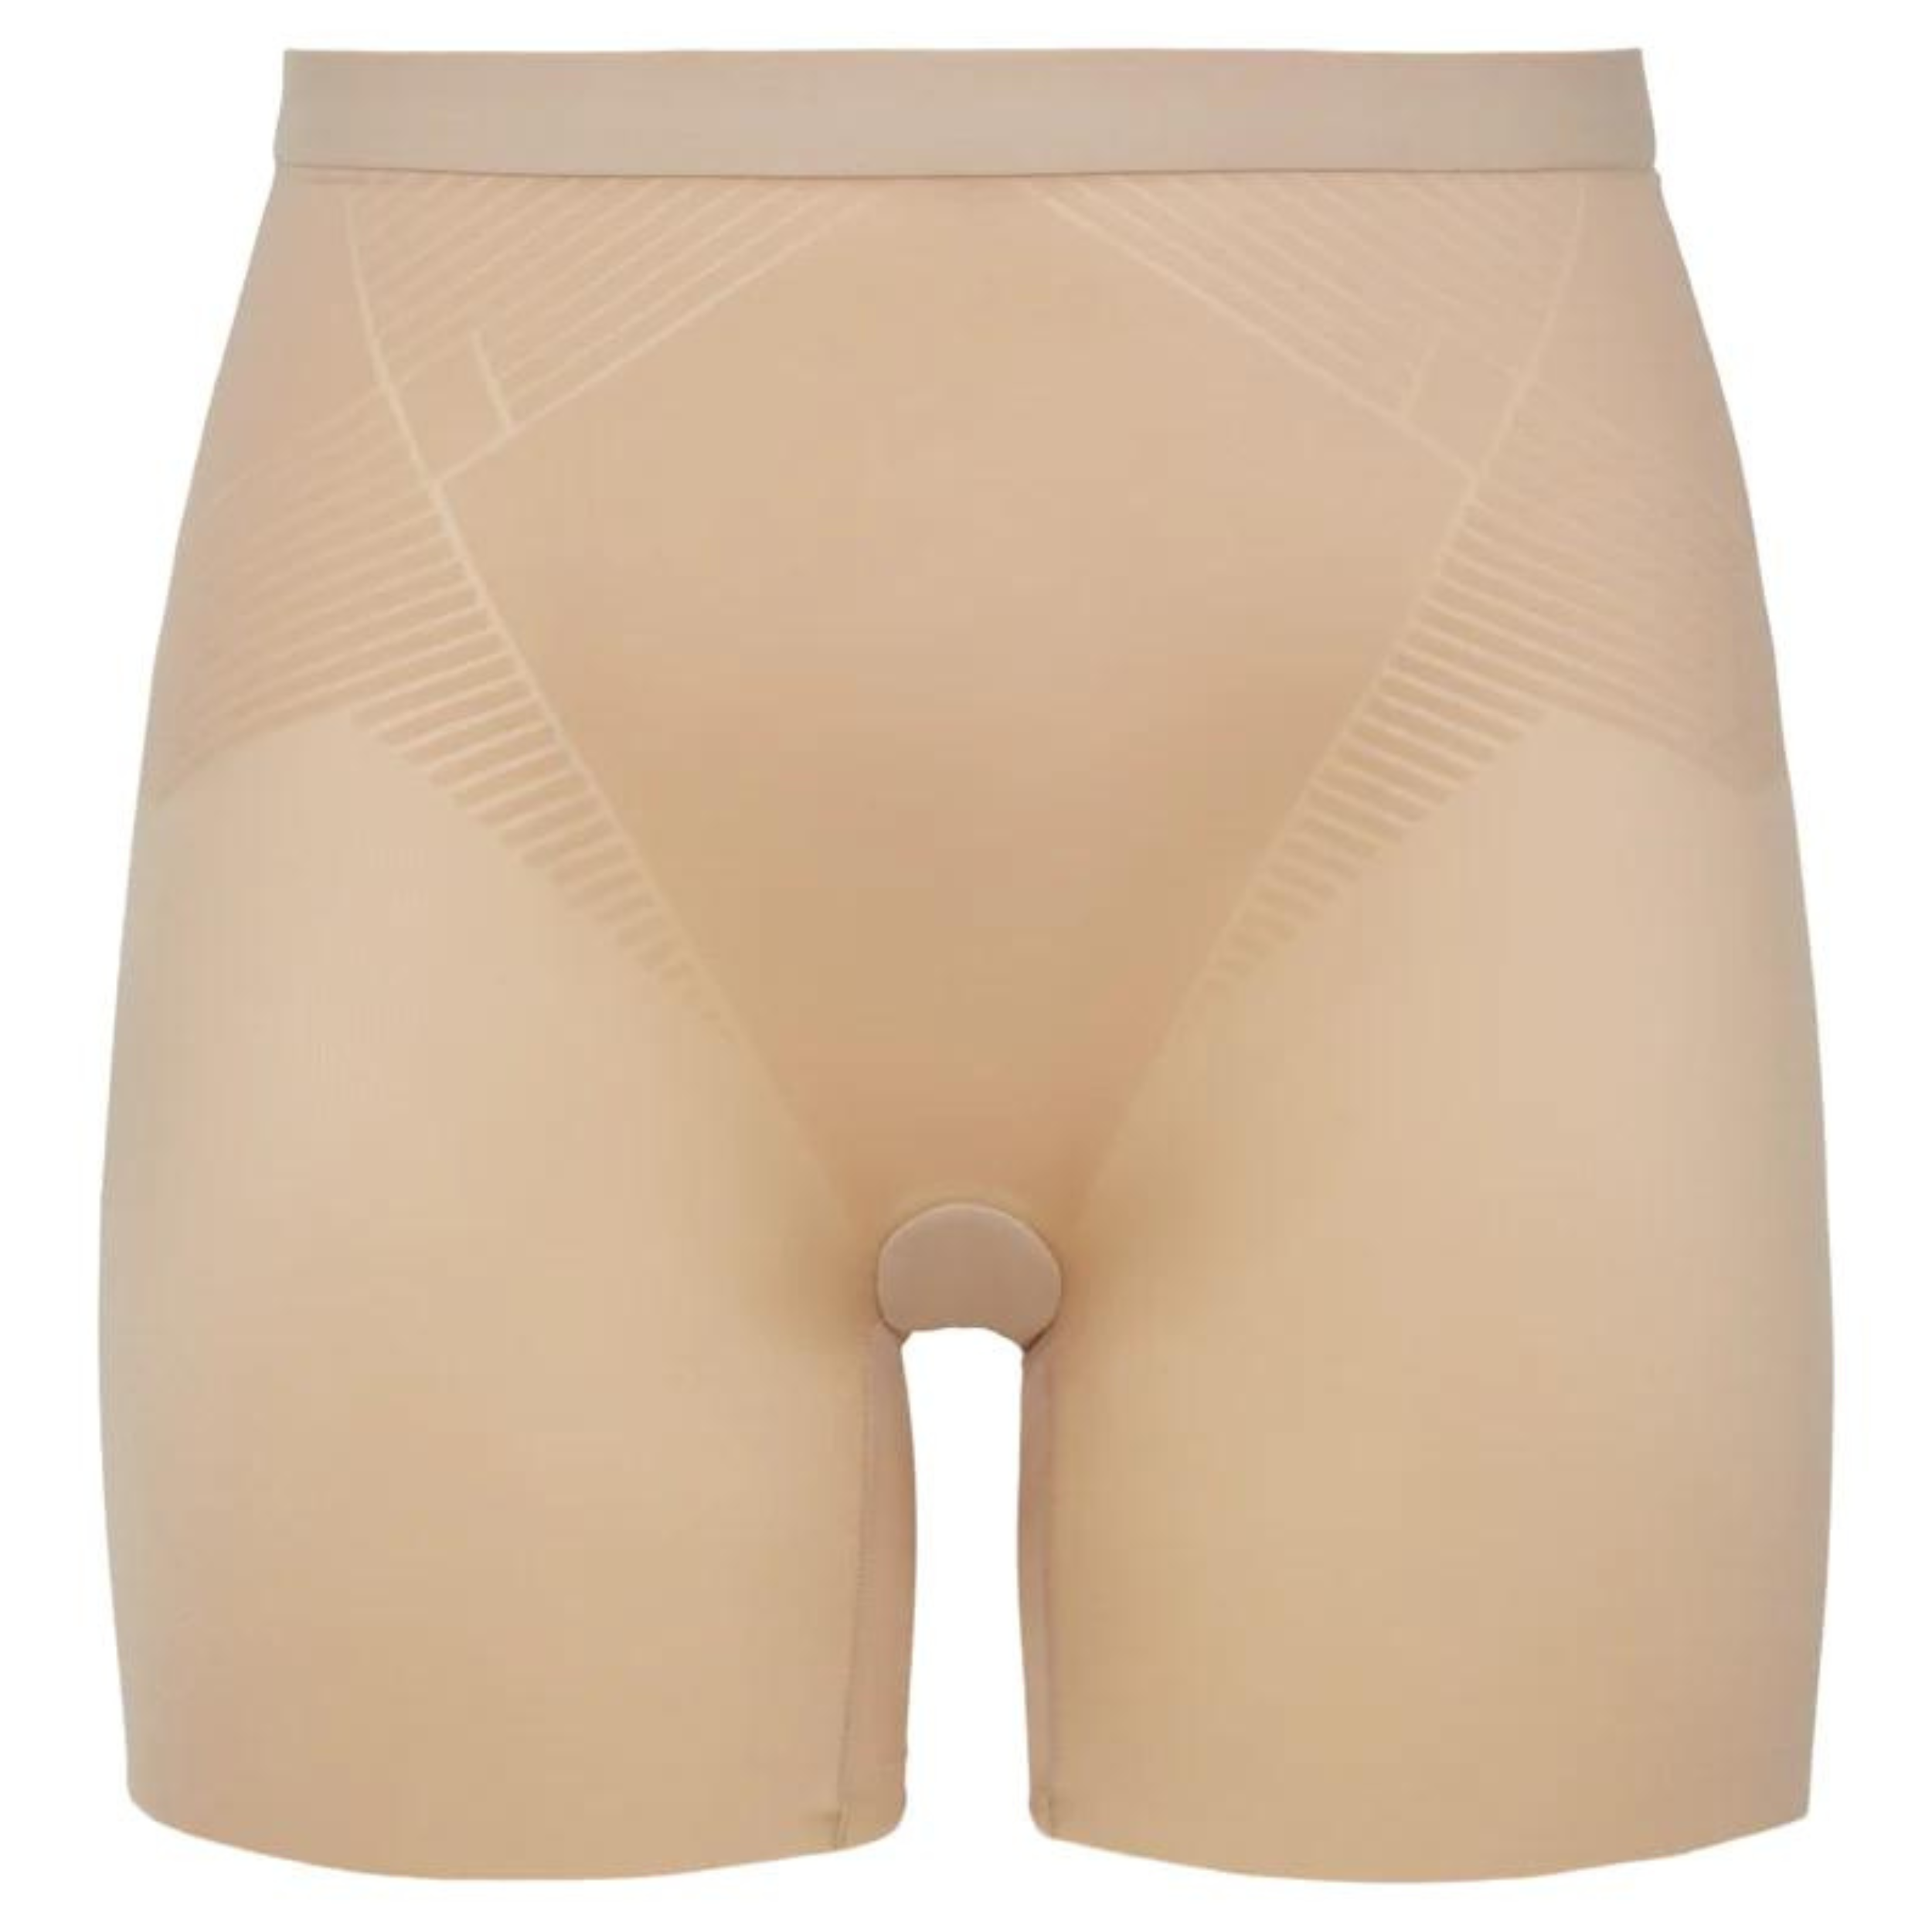 A pair of nude color shorts with ribbed detail around the waist. These shorts are pictured on a white background.